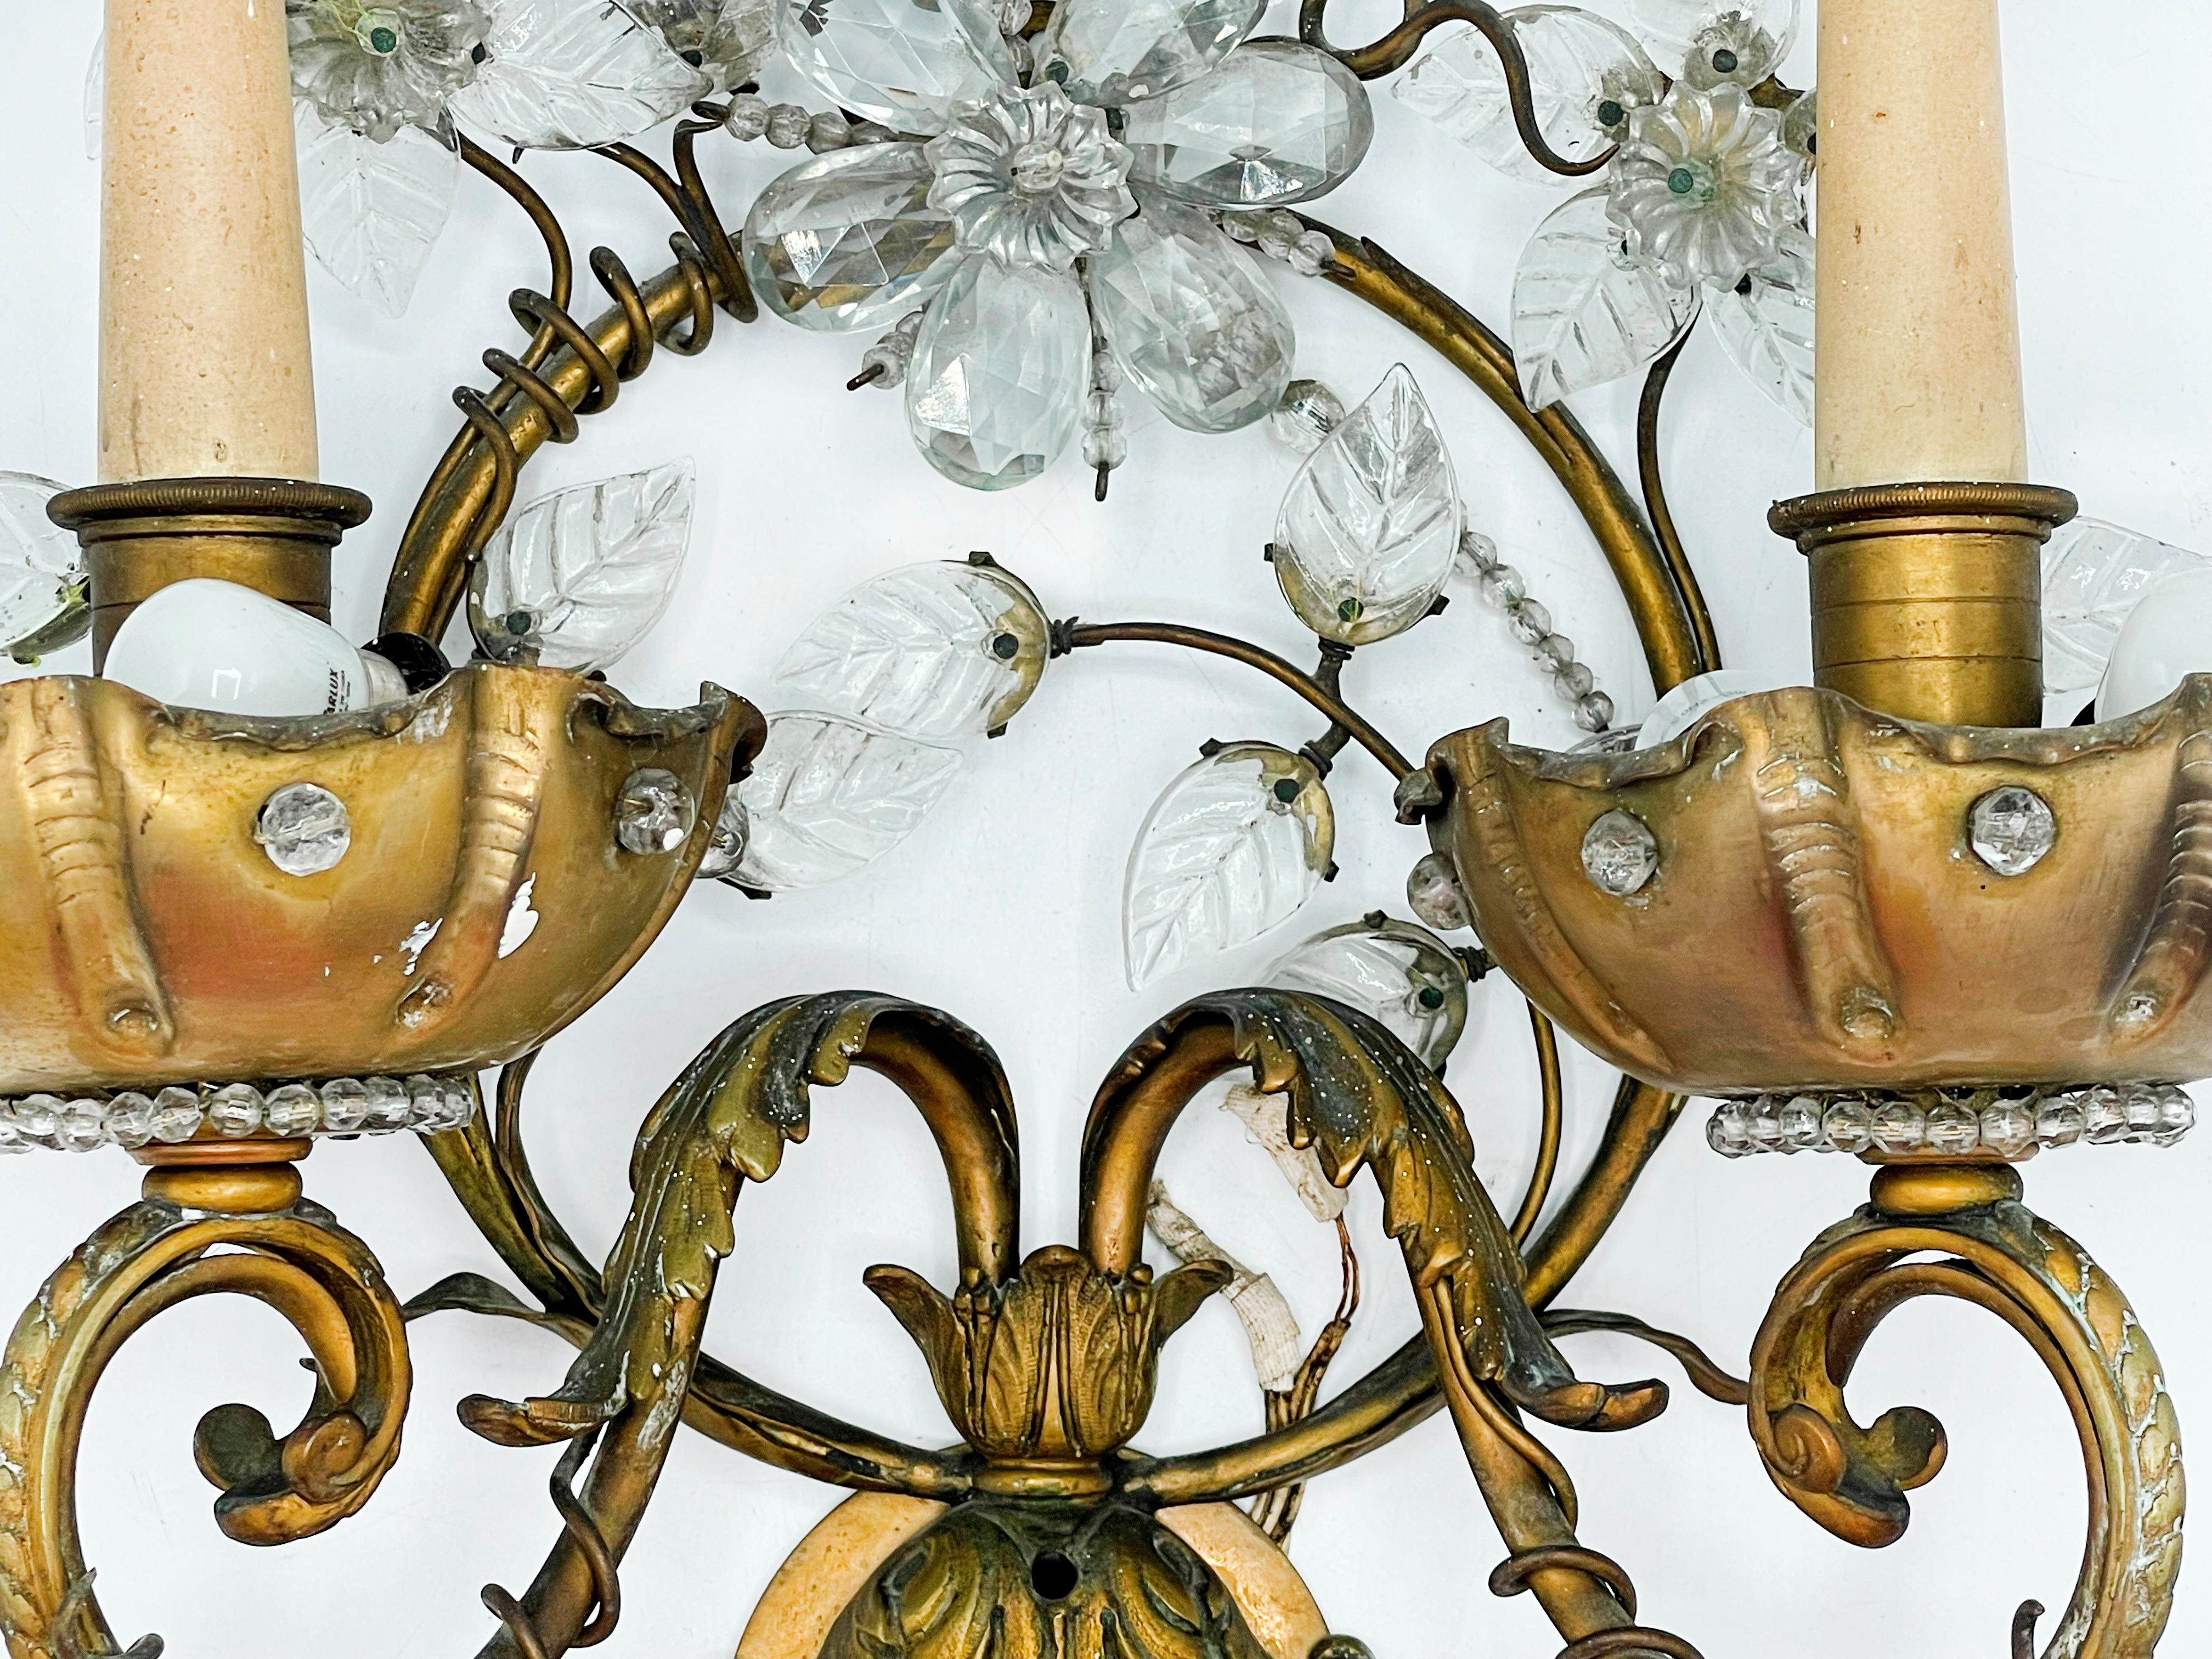 Gilt Pair of Fine French Modern Neoclassical Wall Lights Sconces by Maison Baguès. For Sale